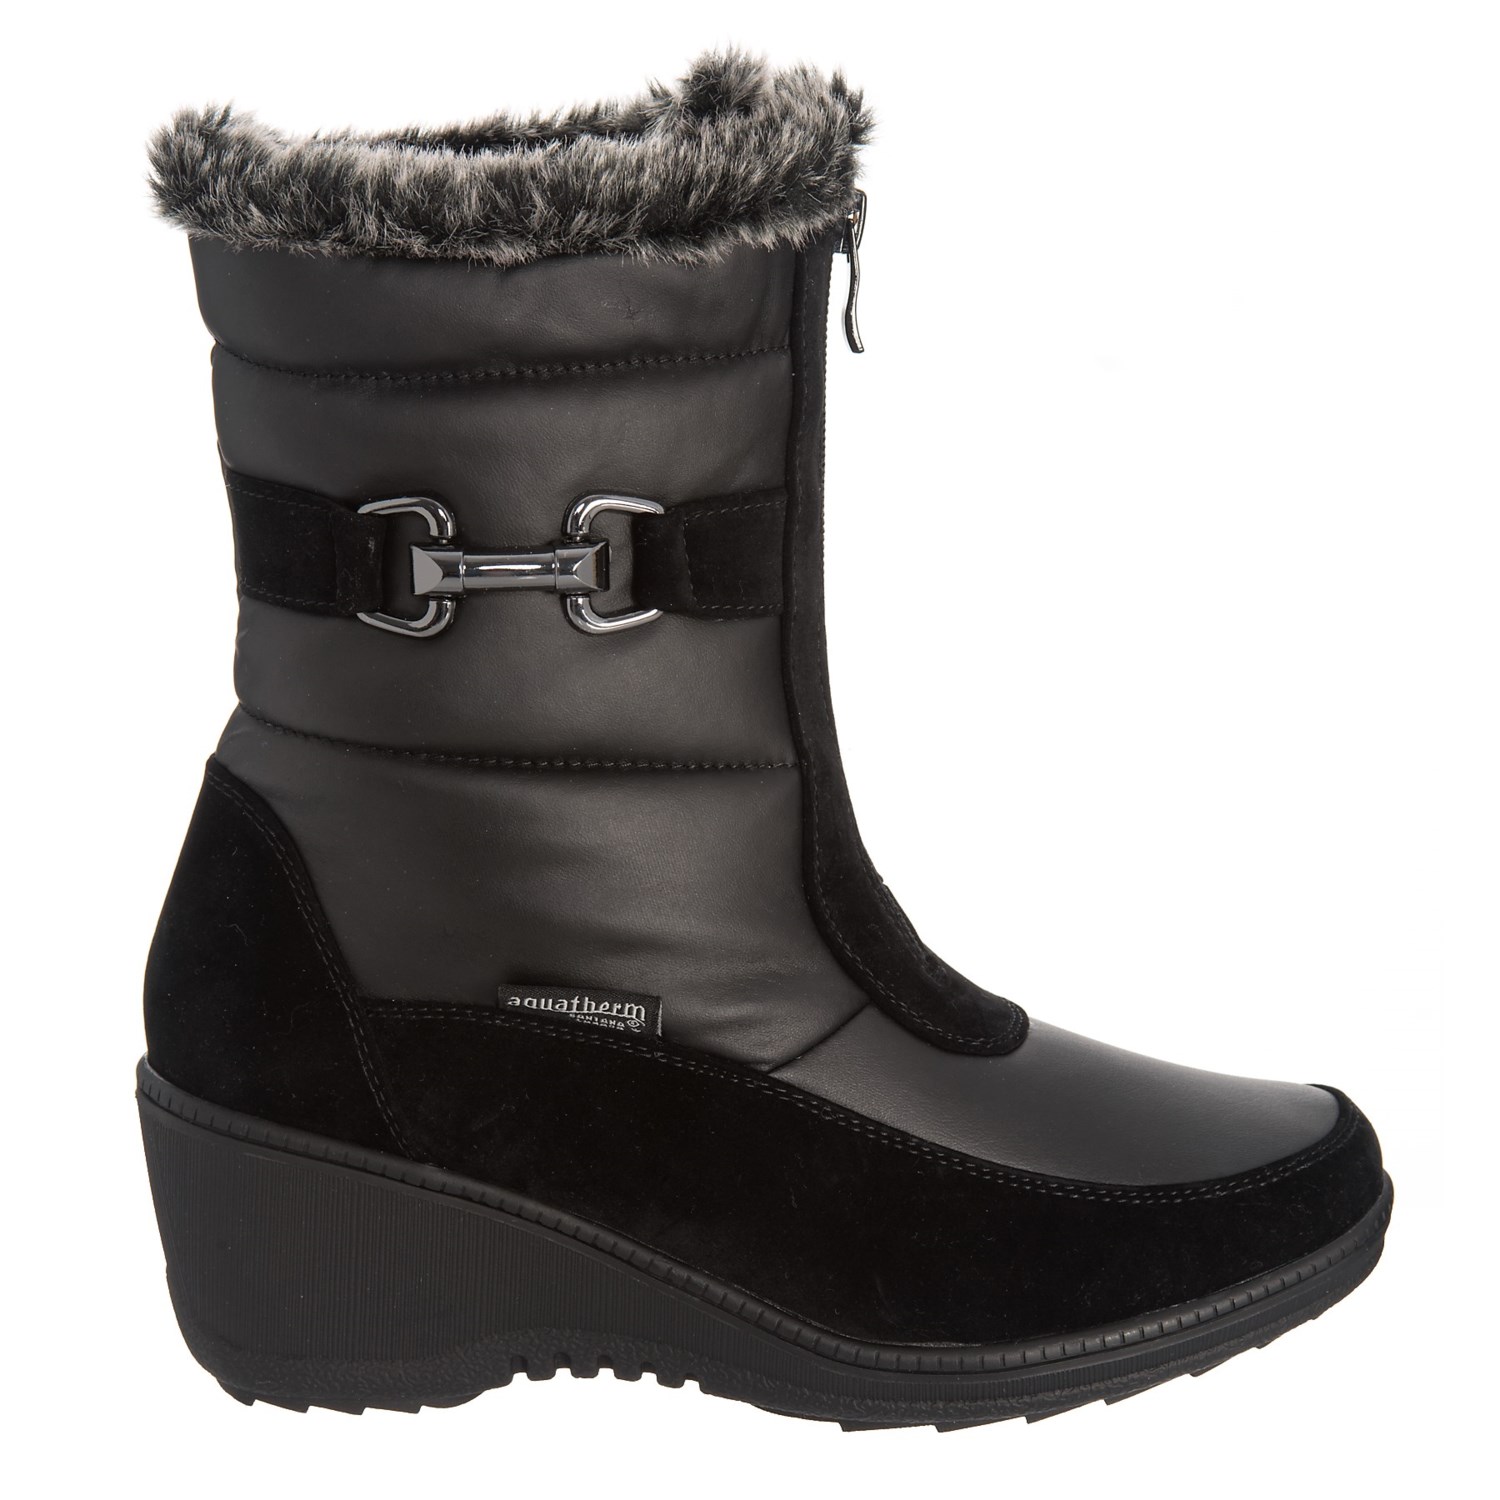 Aquatherm by Santana Canada Wynter Snow Boots (For Women) - Save 63%